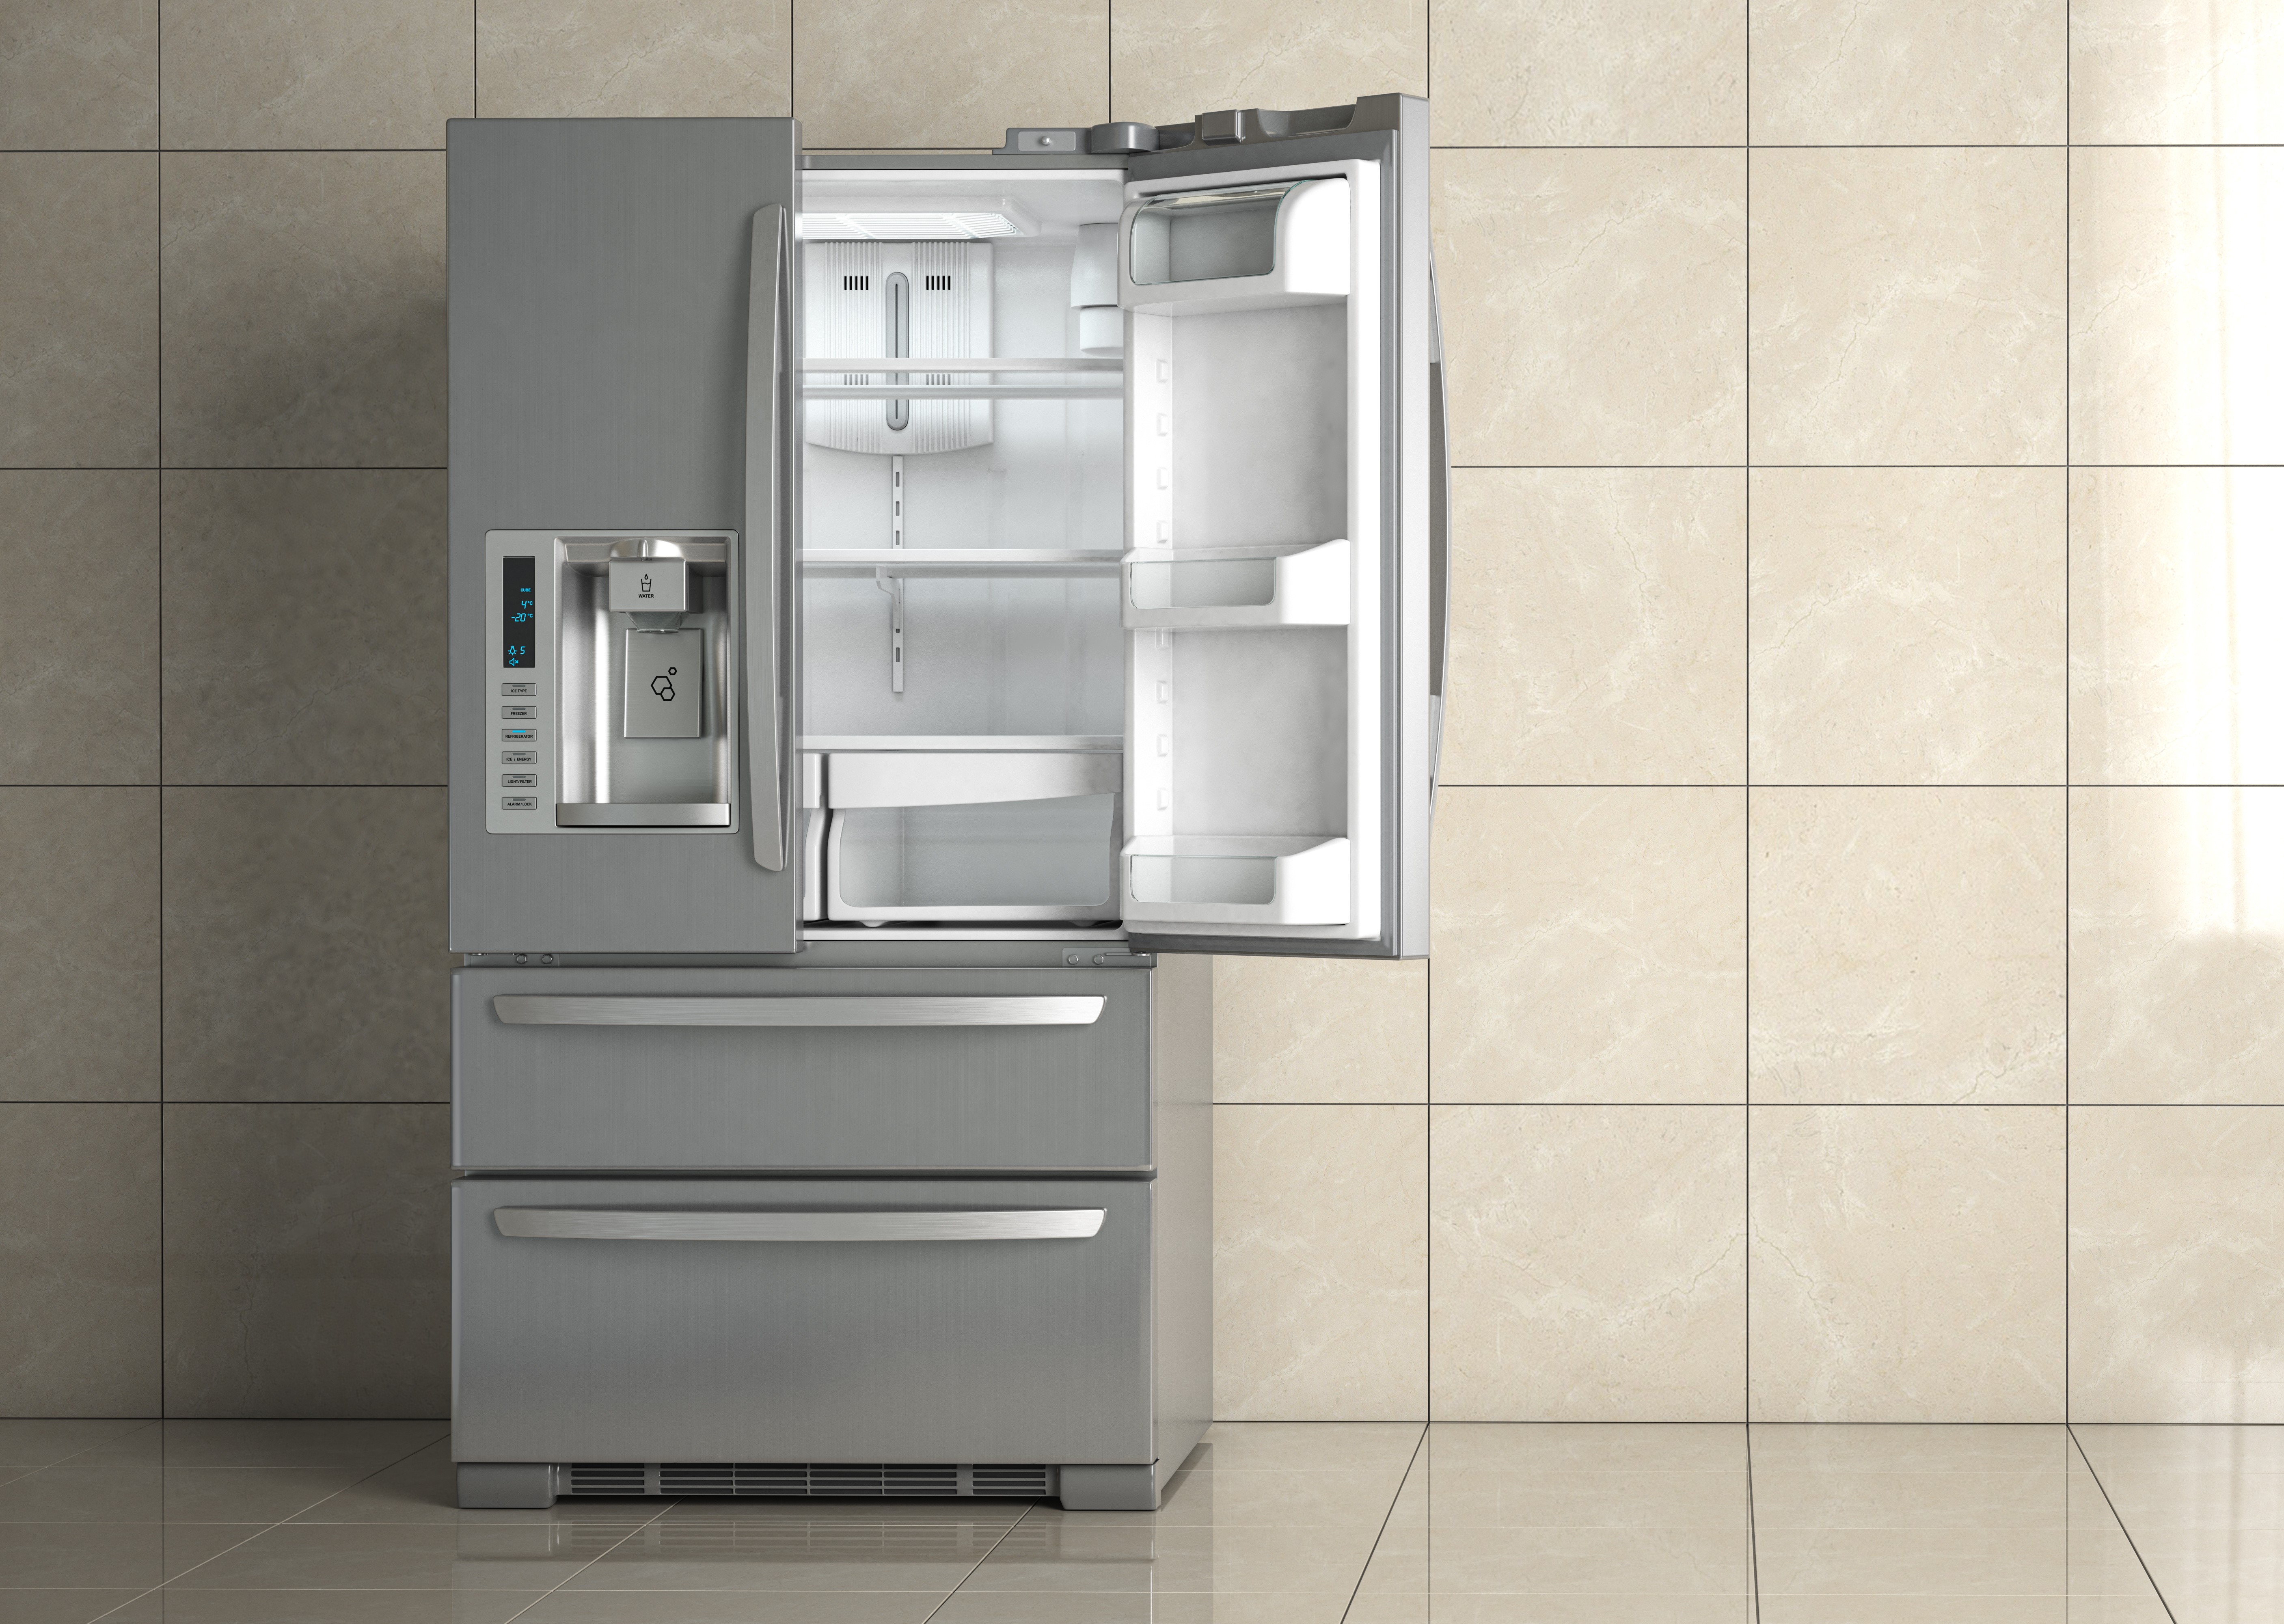 Modern energy-efficient refrigerator open in a tiled kitchen, showcasing its compartments.